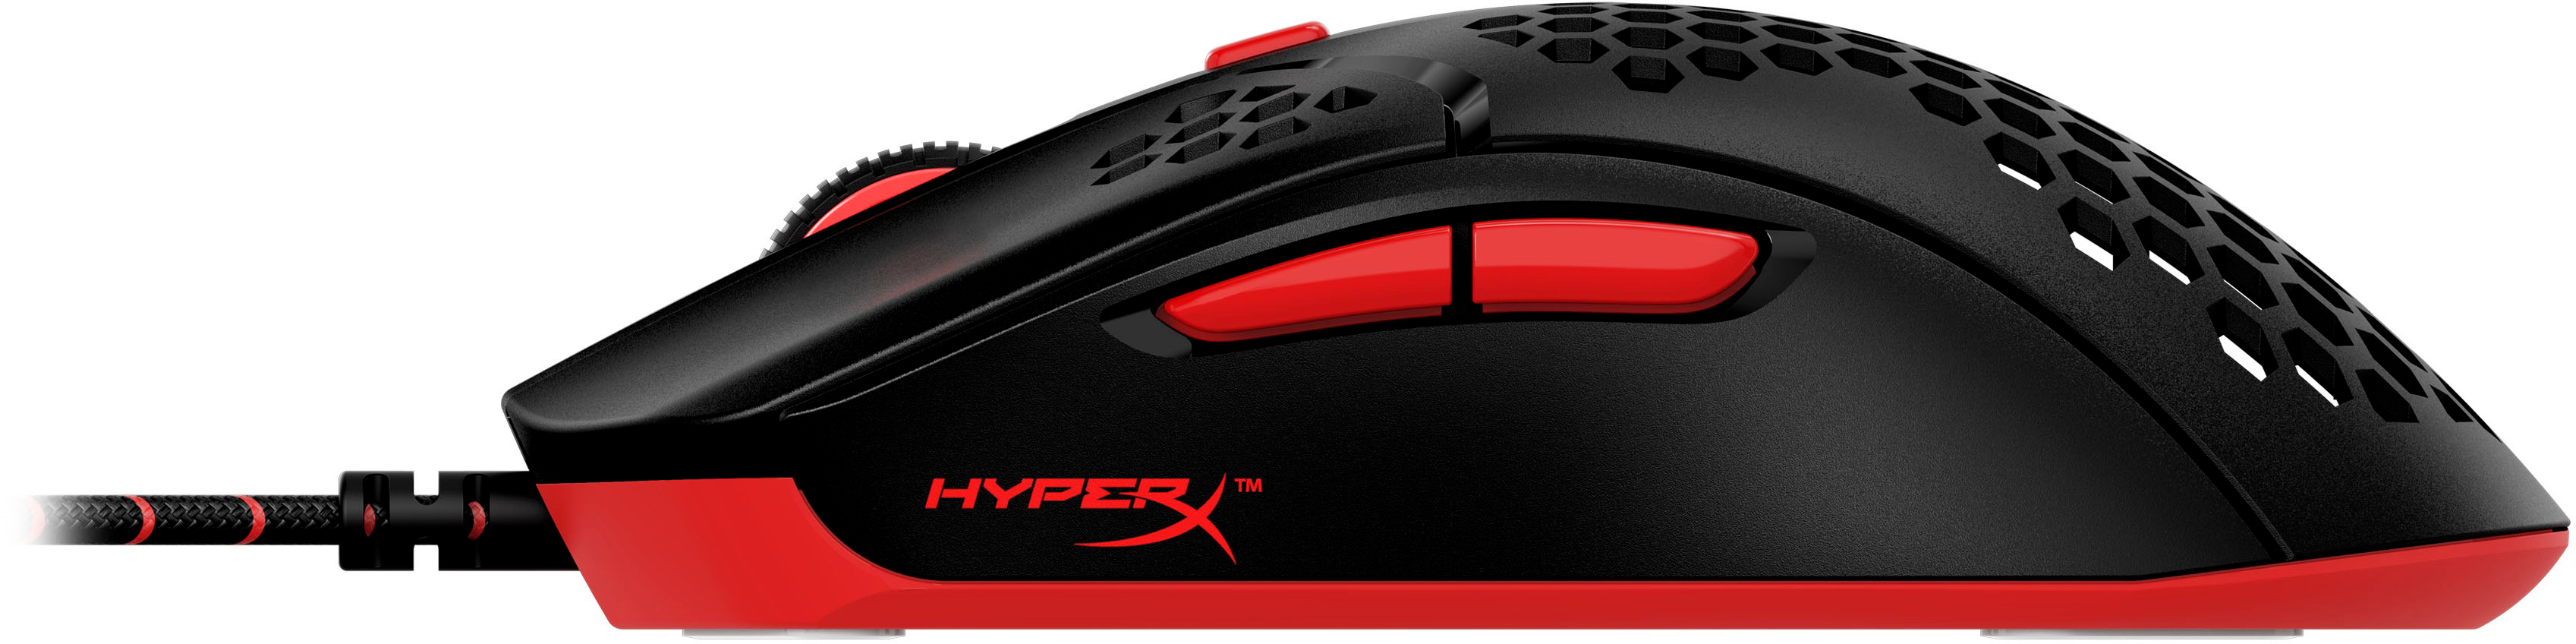 Angle View: HyperX - Pulsefire Haste Lightweight Wired Optical Gaming Right-handed Mouse with RGB Lighting - Black and red